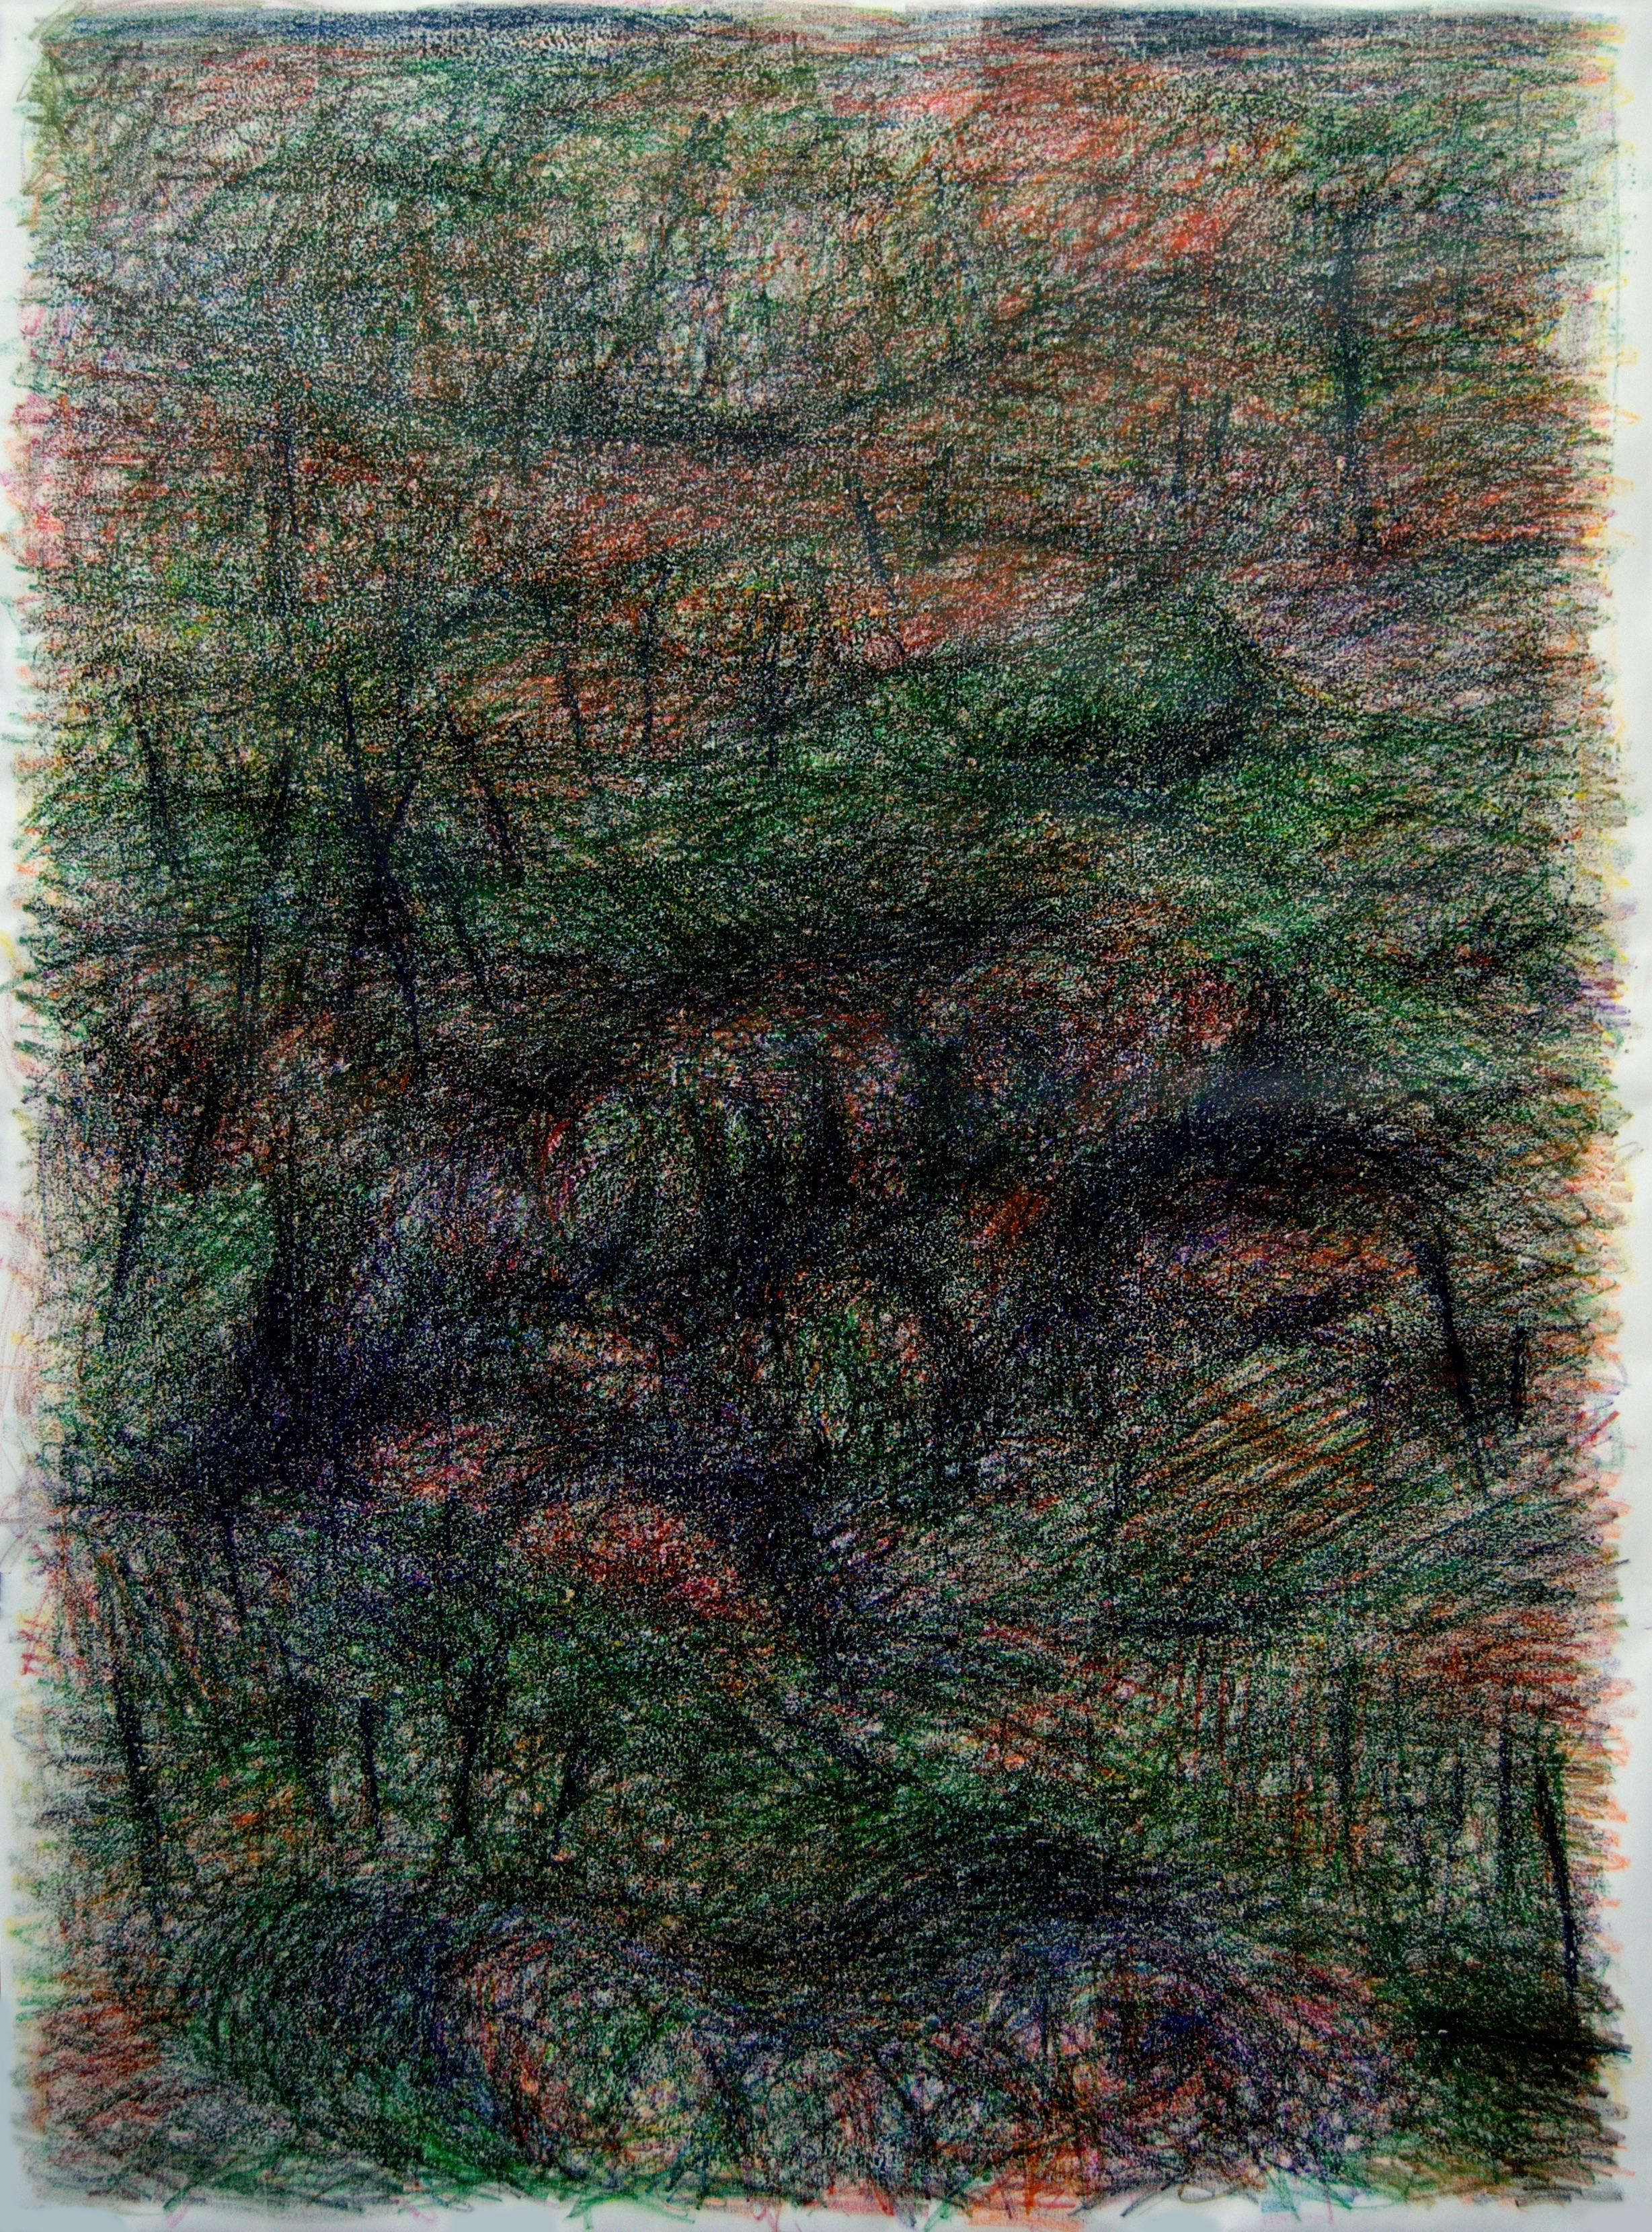 Untitled 03 - Abstract Drawing on Canvas, Green, Contemporary, Gestural